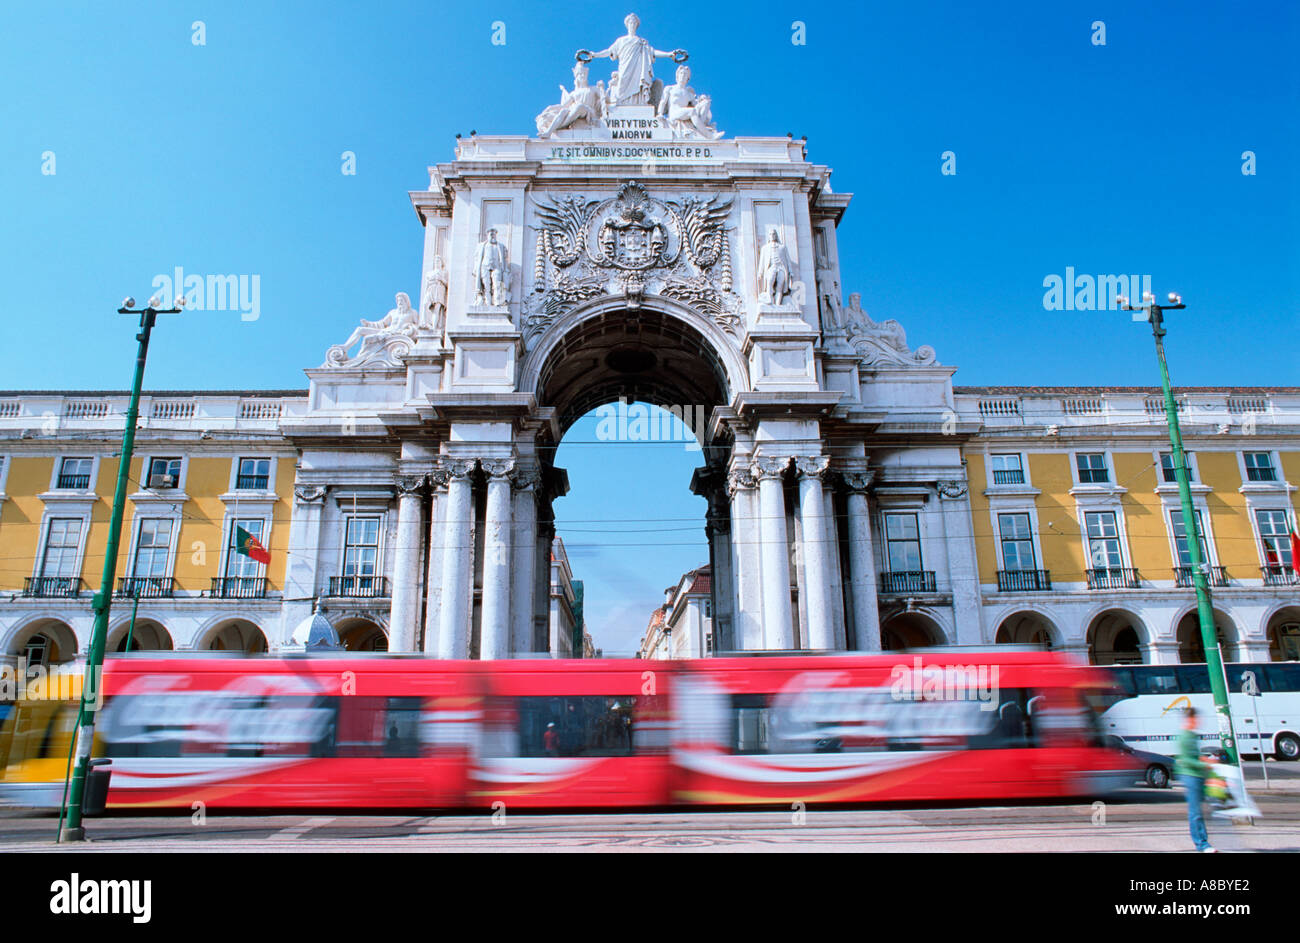 Modern tram passing at Triumph Arch Comercial Square Lisbon Europe Stock Photo